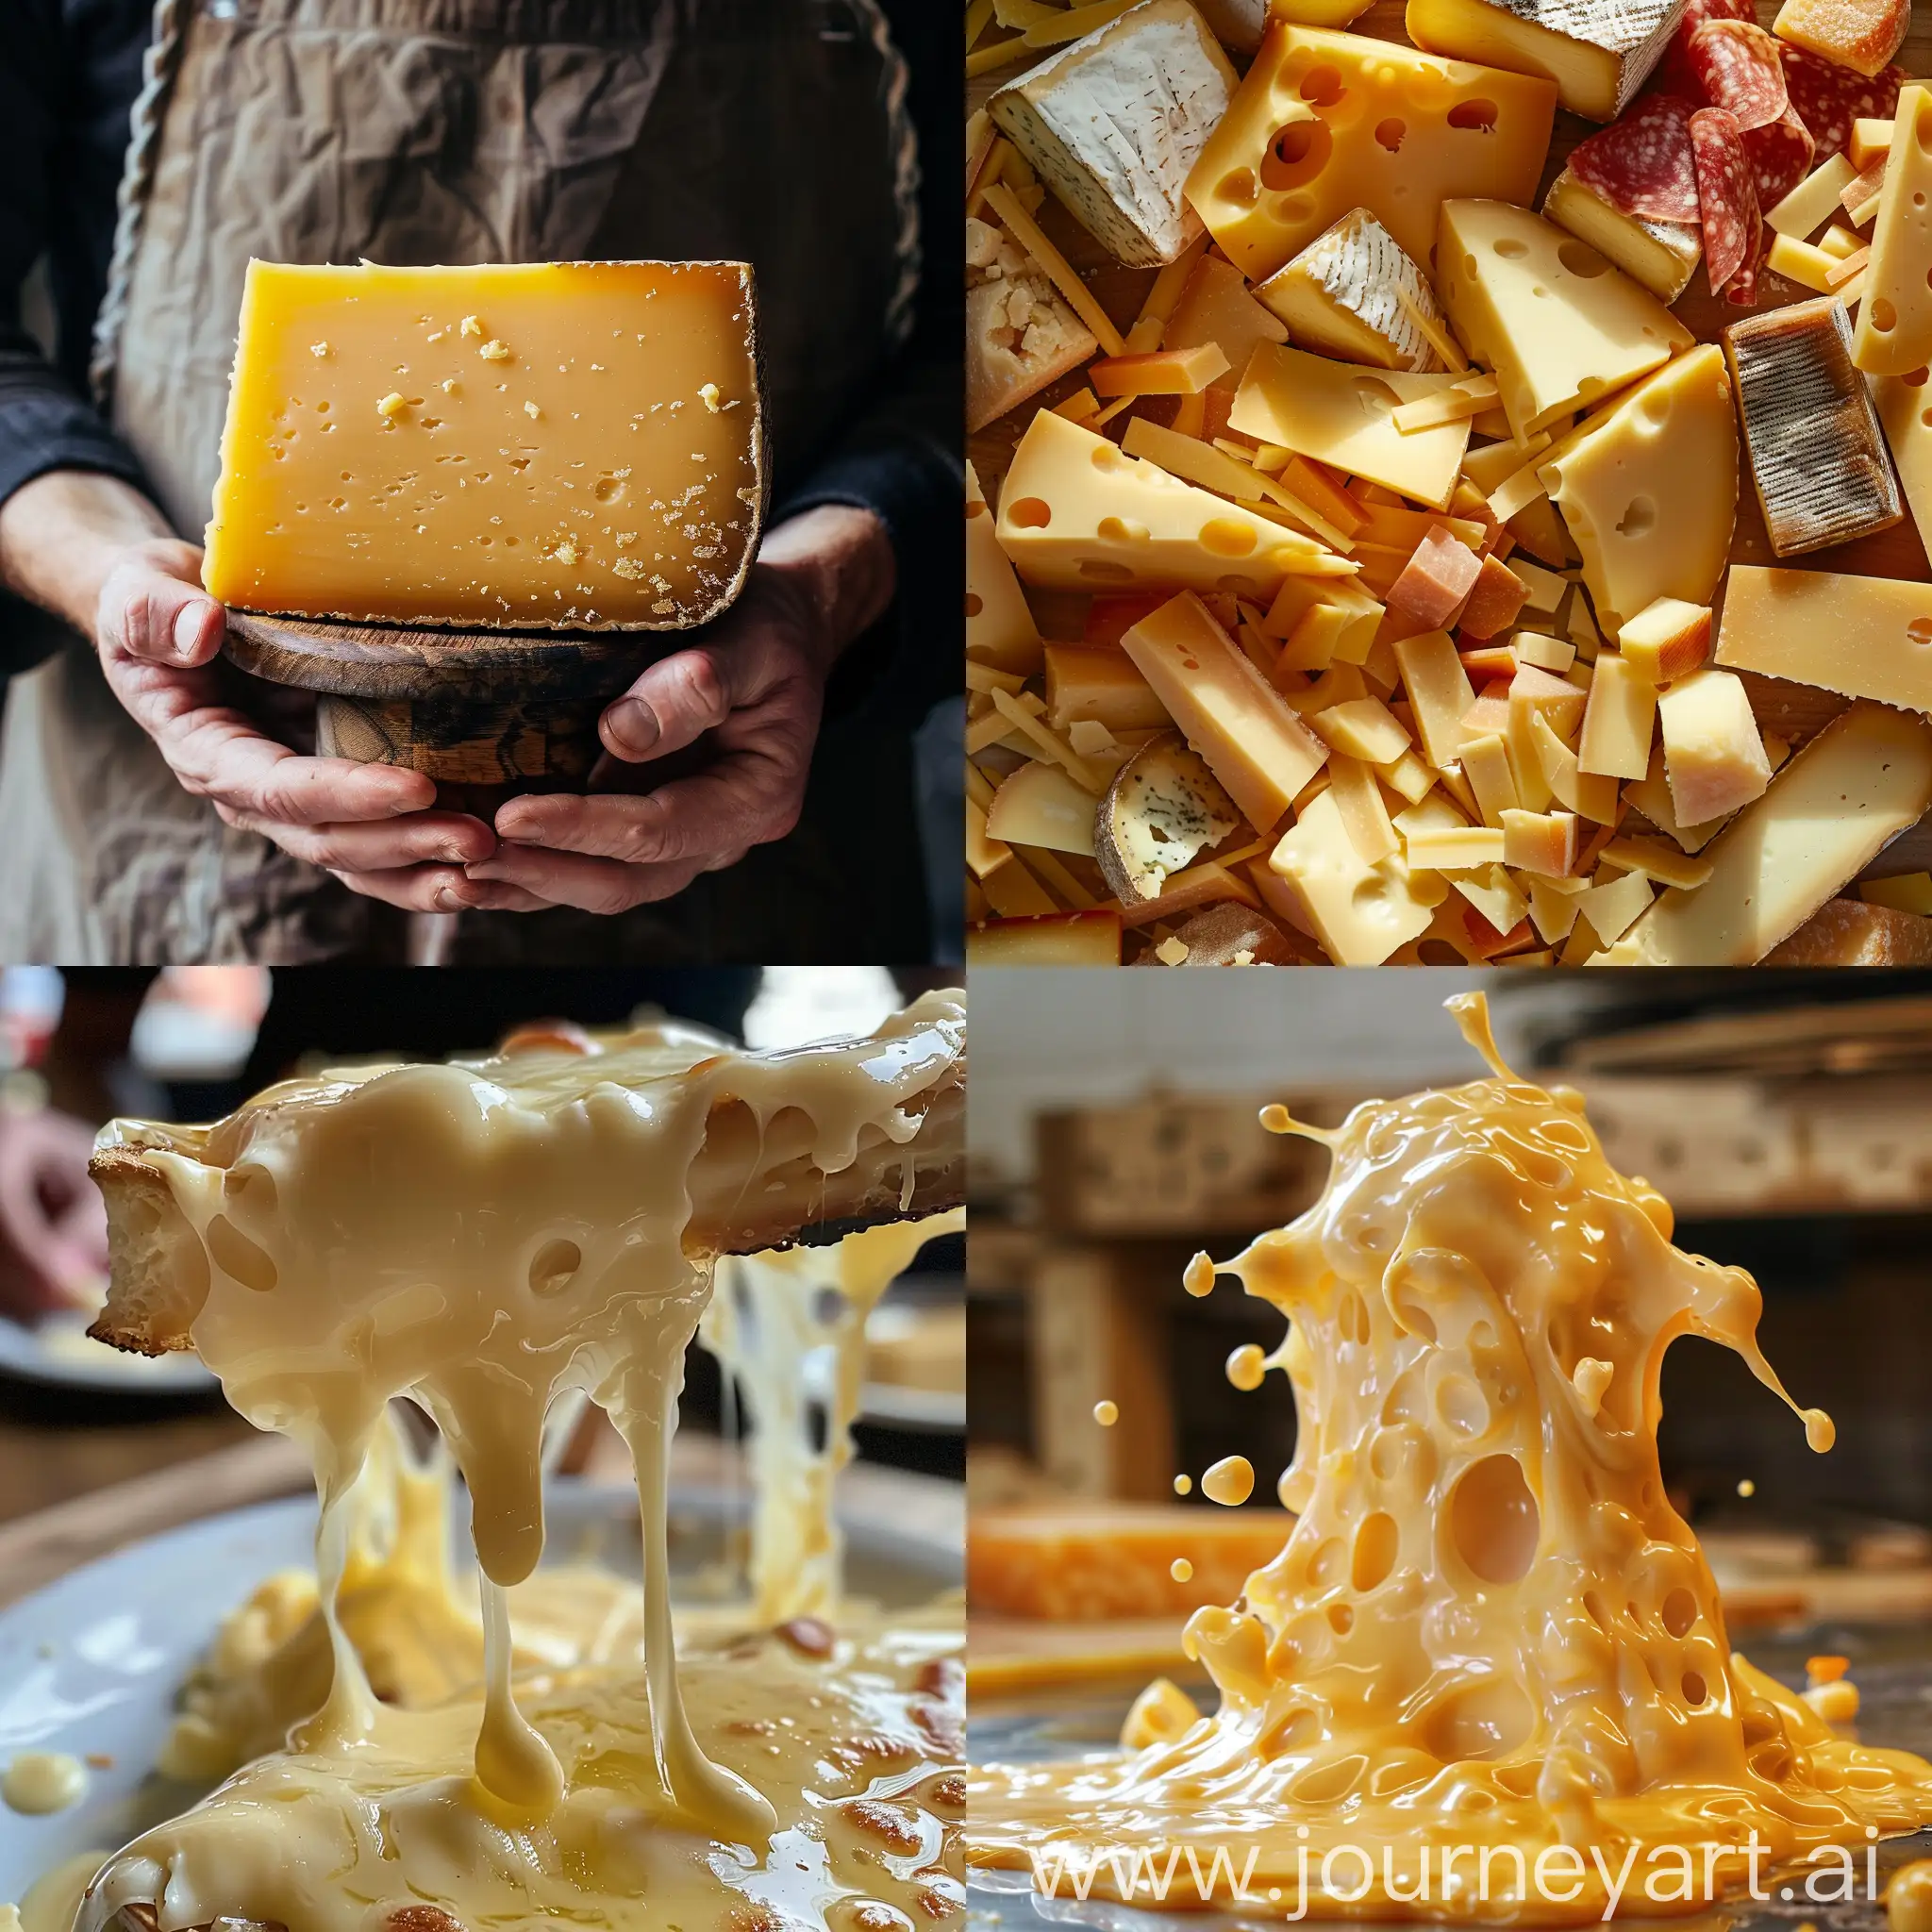 Enthusiastic-Cheese-Lover-Admiring-a-Towering-Cheese-Display